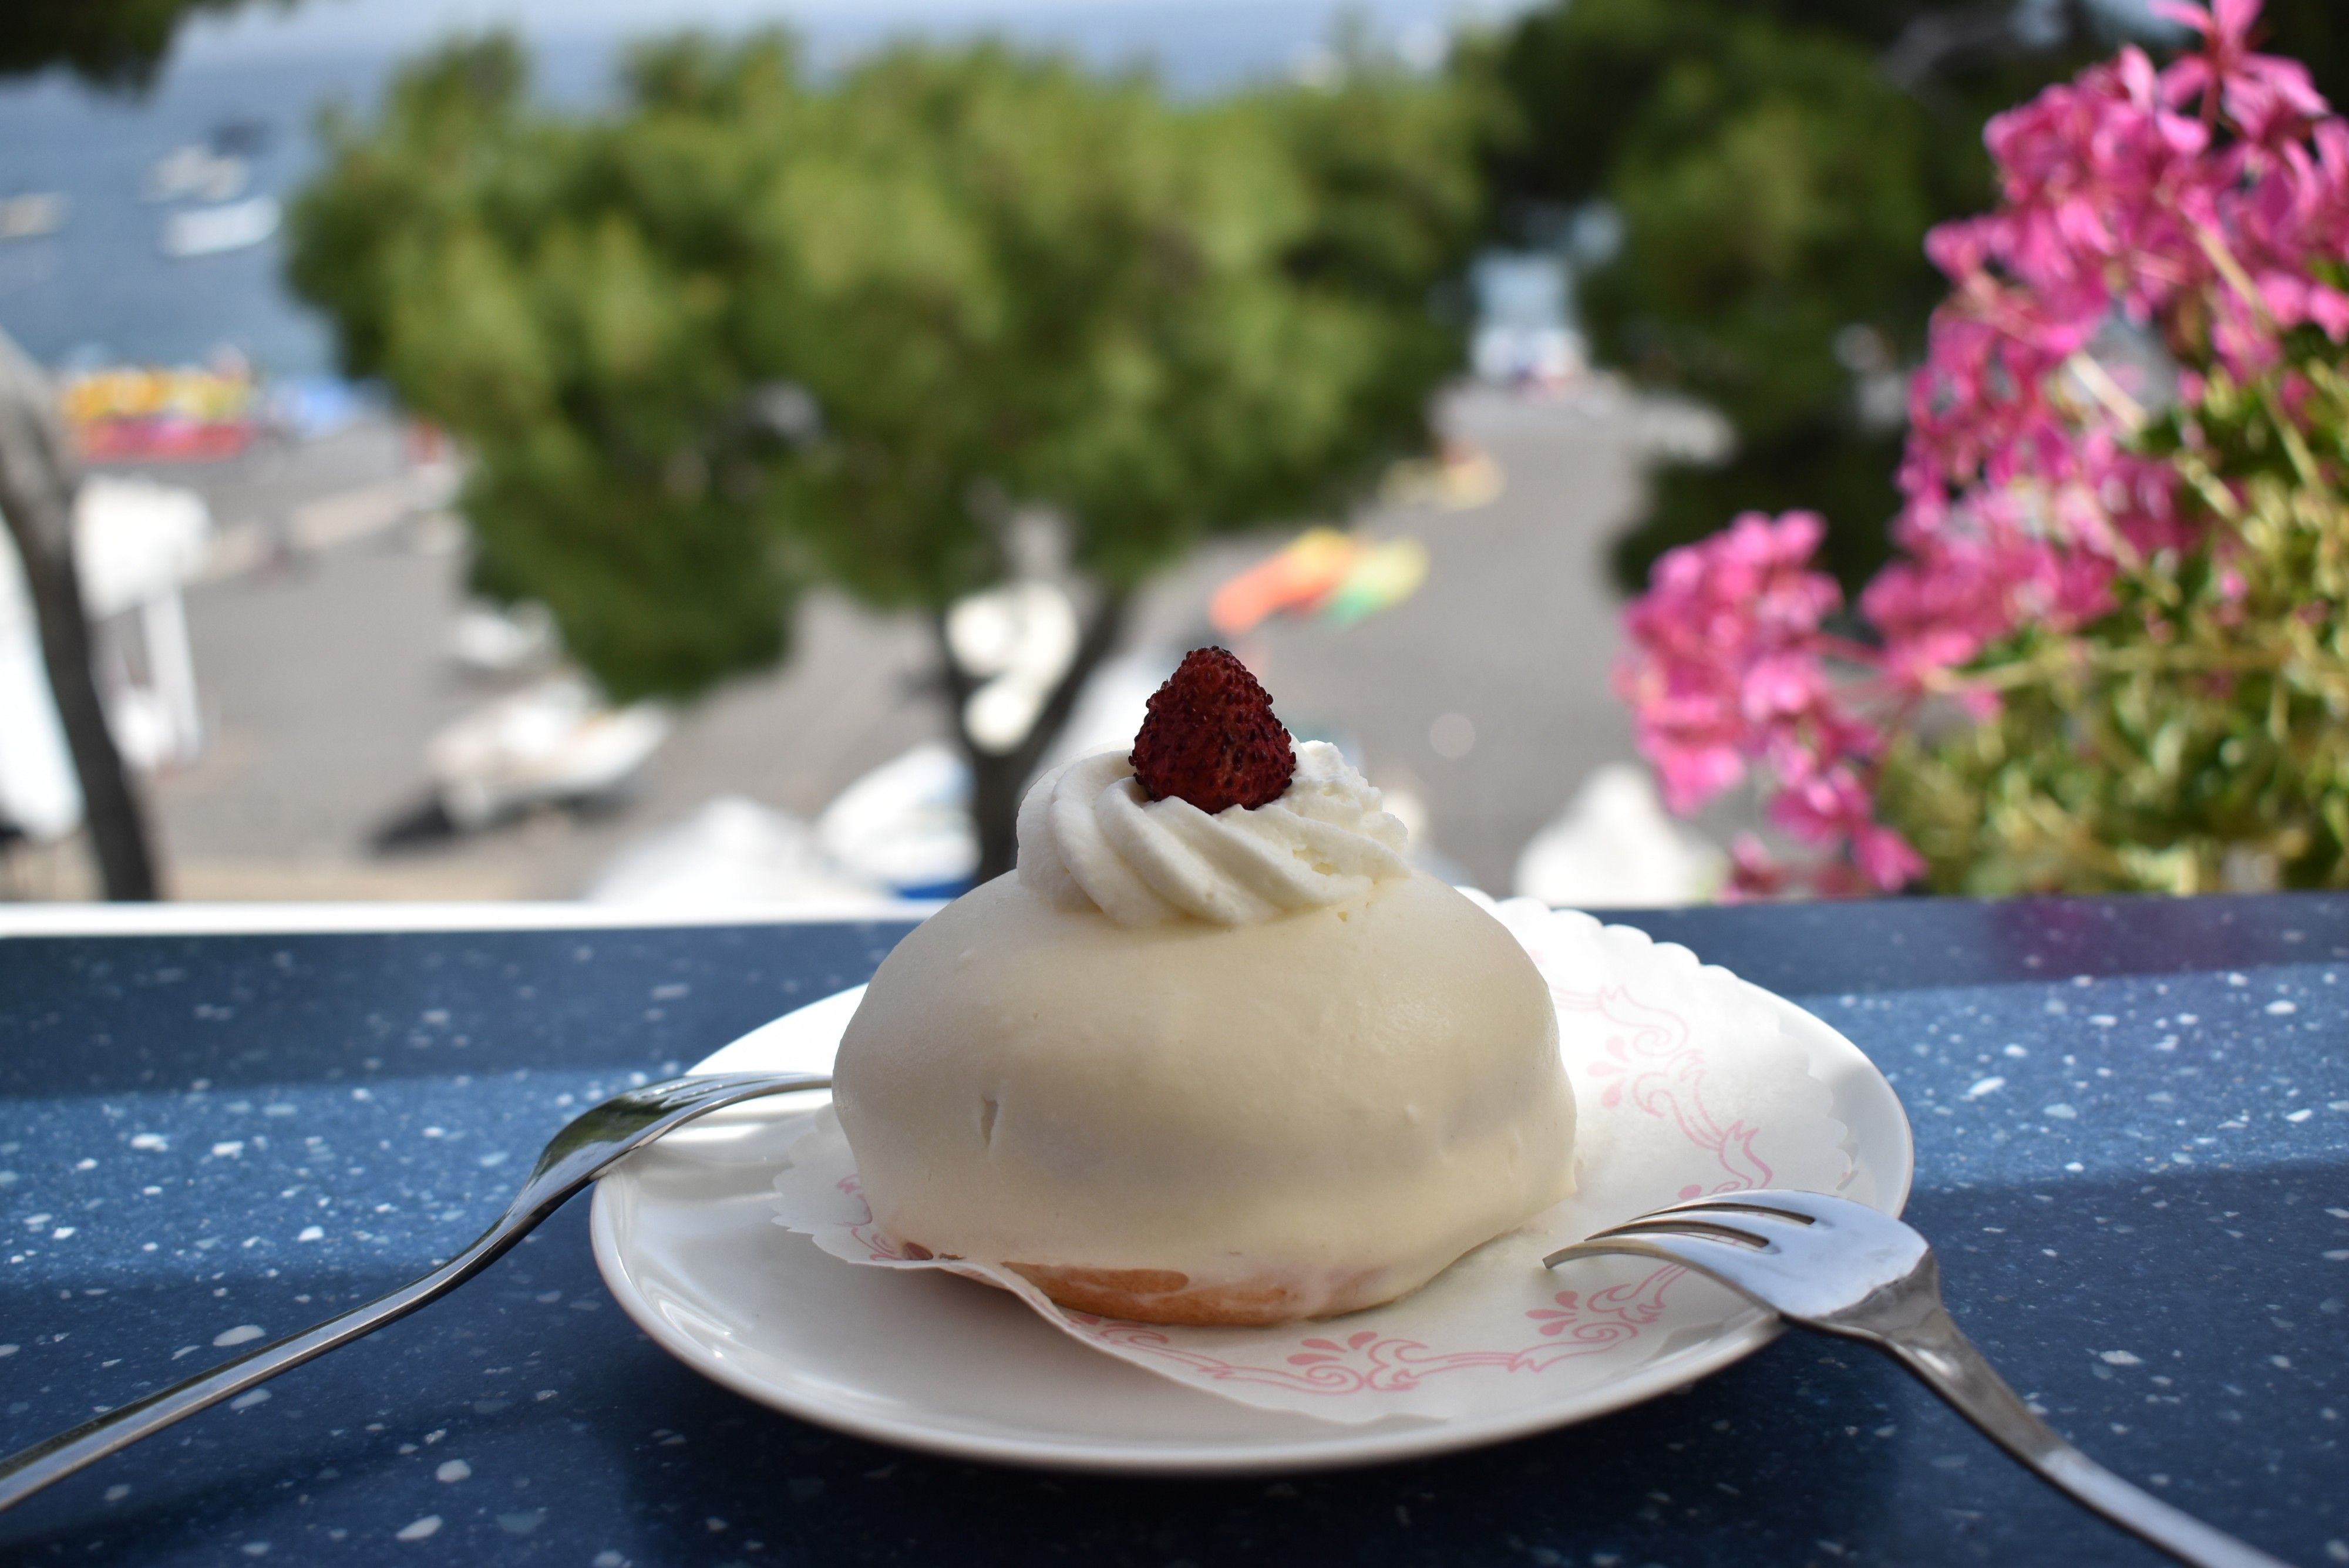 Caption: A photo of a small white round Delizia al Limone cake with whipped cream and a wild strawberry on top and two forks placed on the plate. Pink flowers and the Positano beach are visible in the background. (Local Guide @MoniDi)